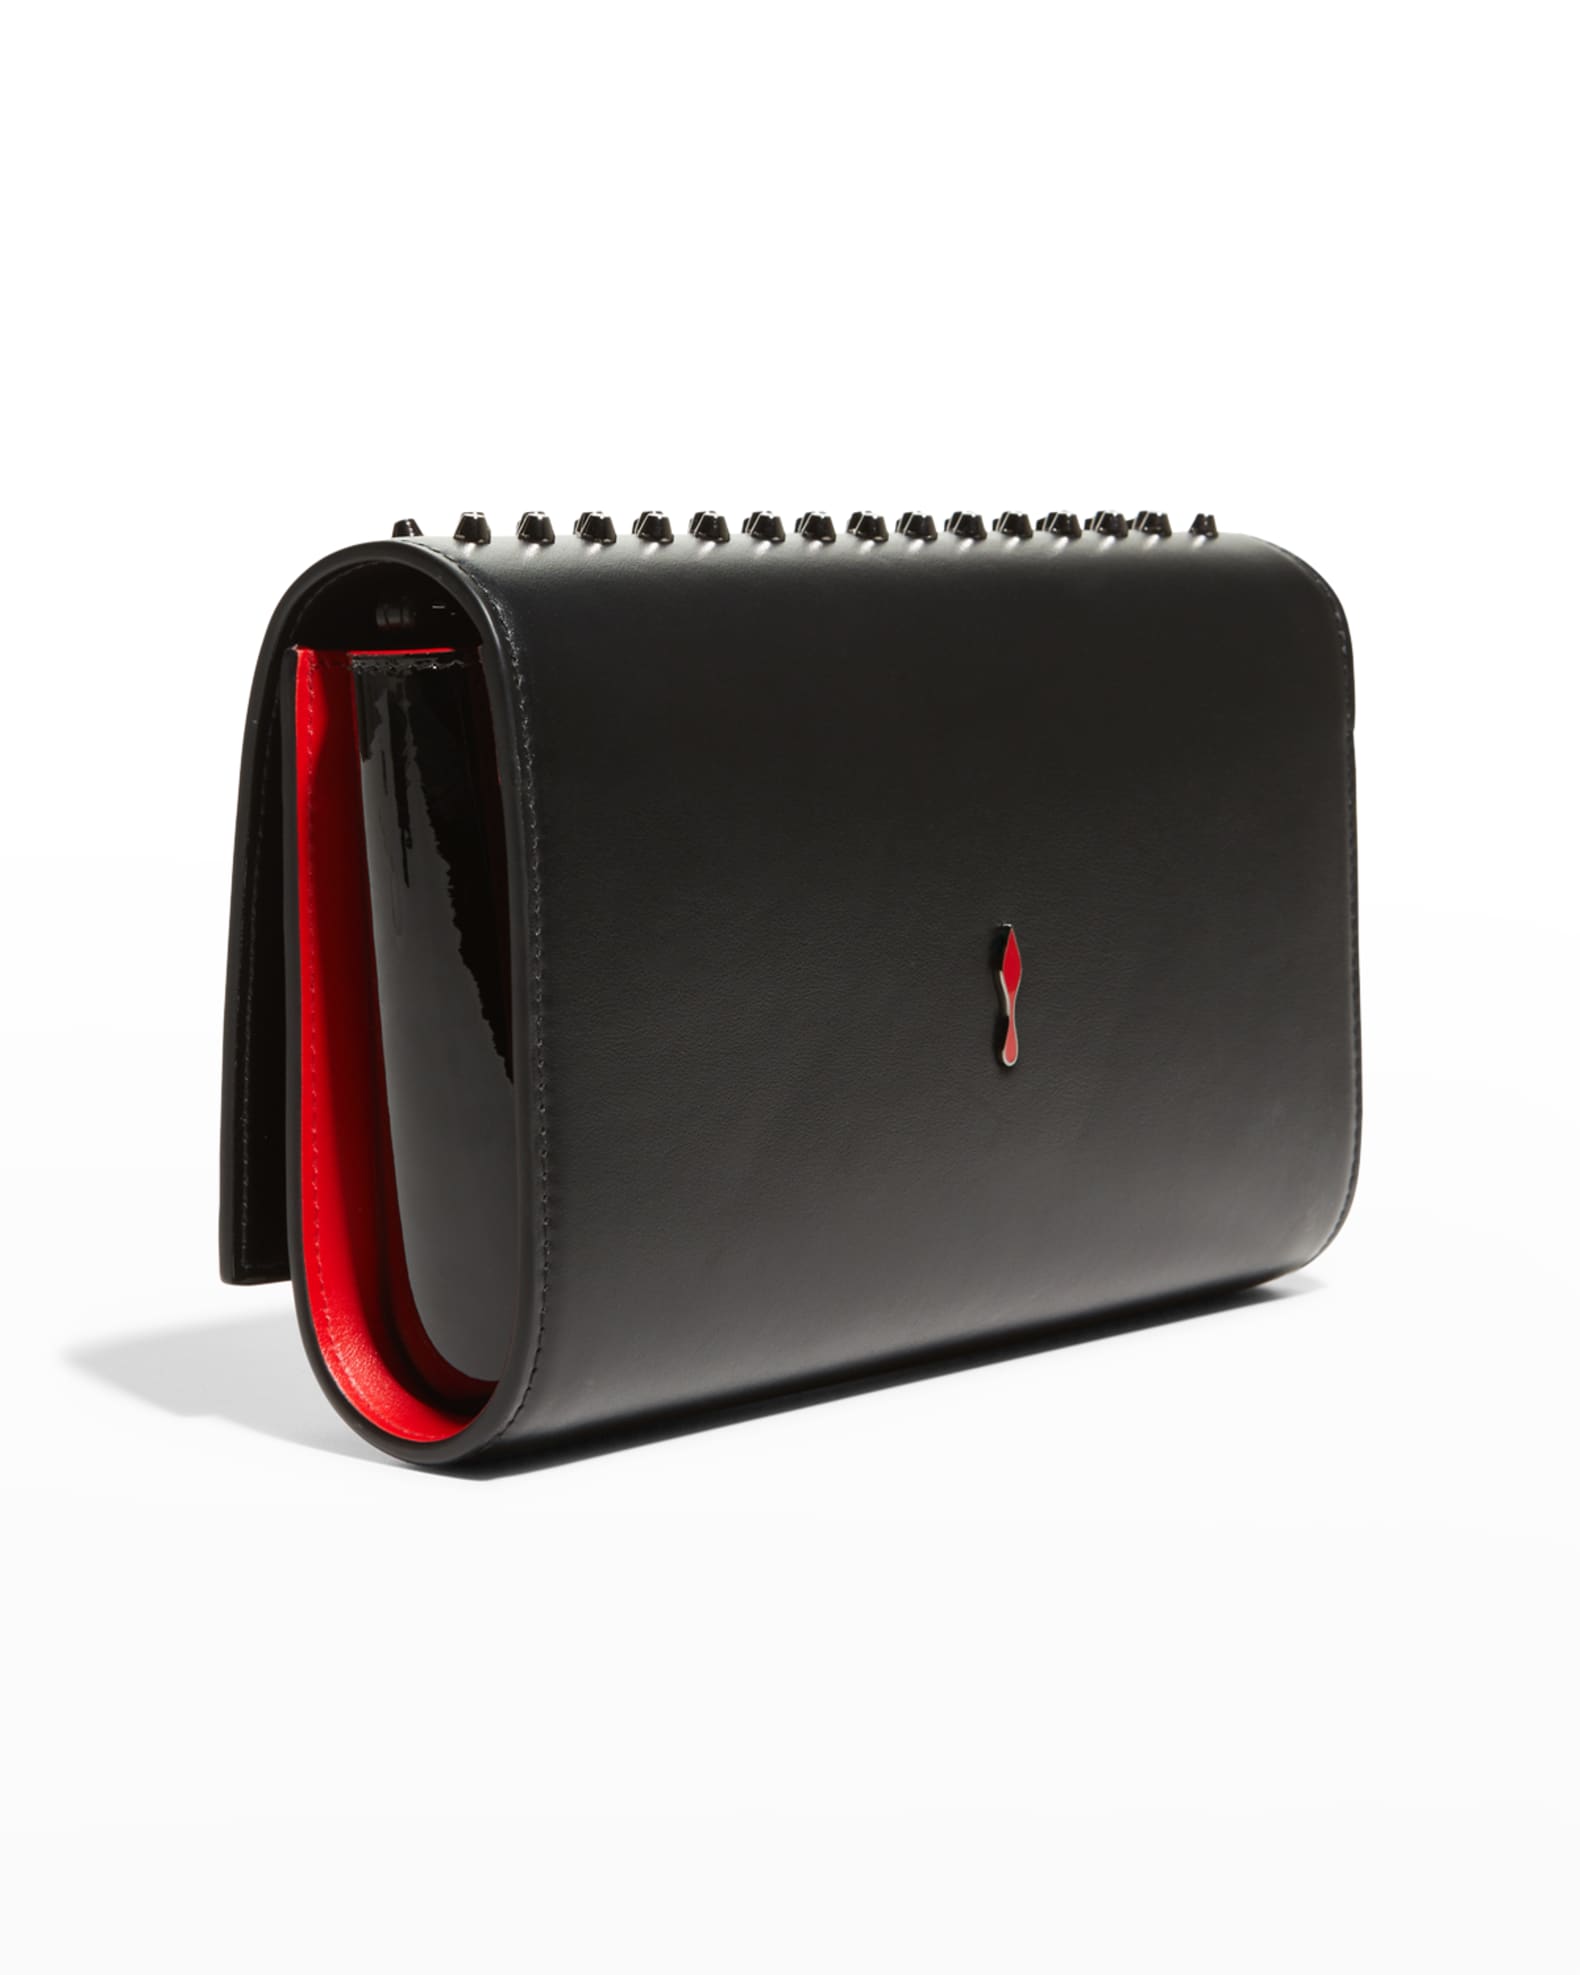 Christian Louboutin Releases Mexicaba Bag – The Hollywood Reporter